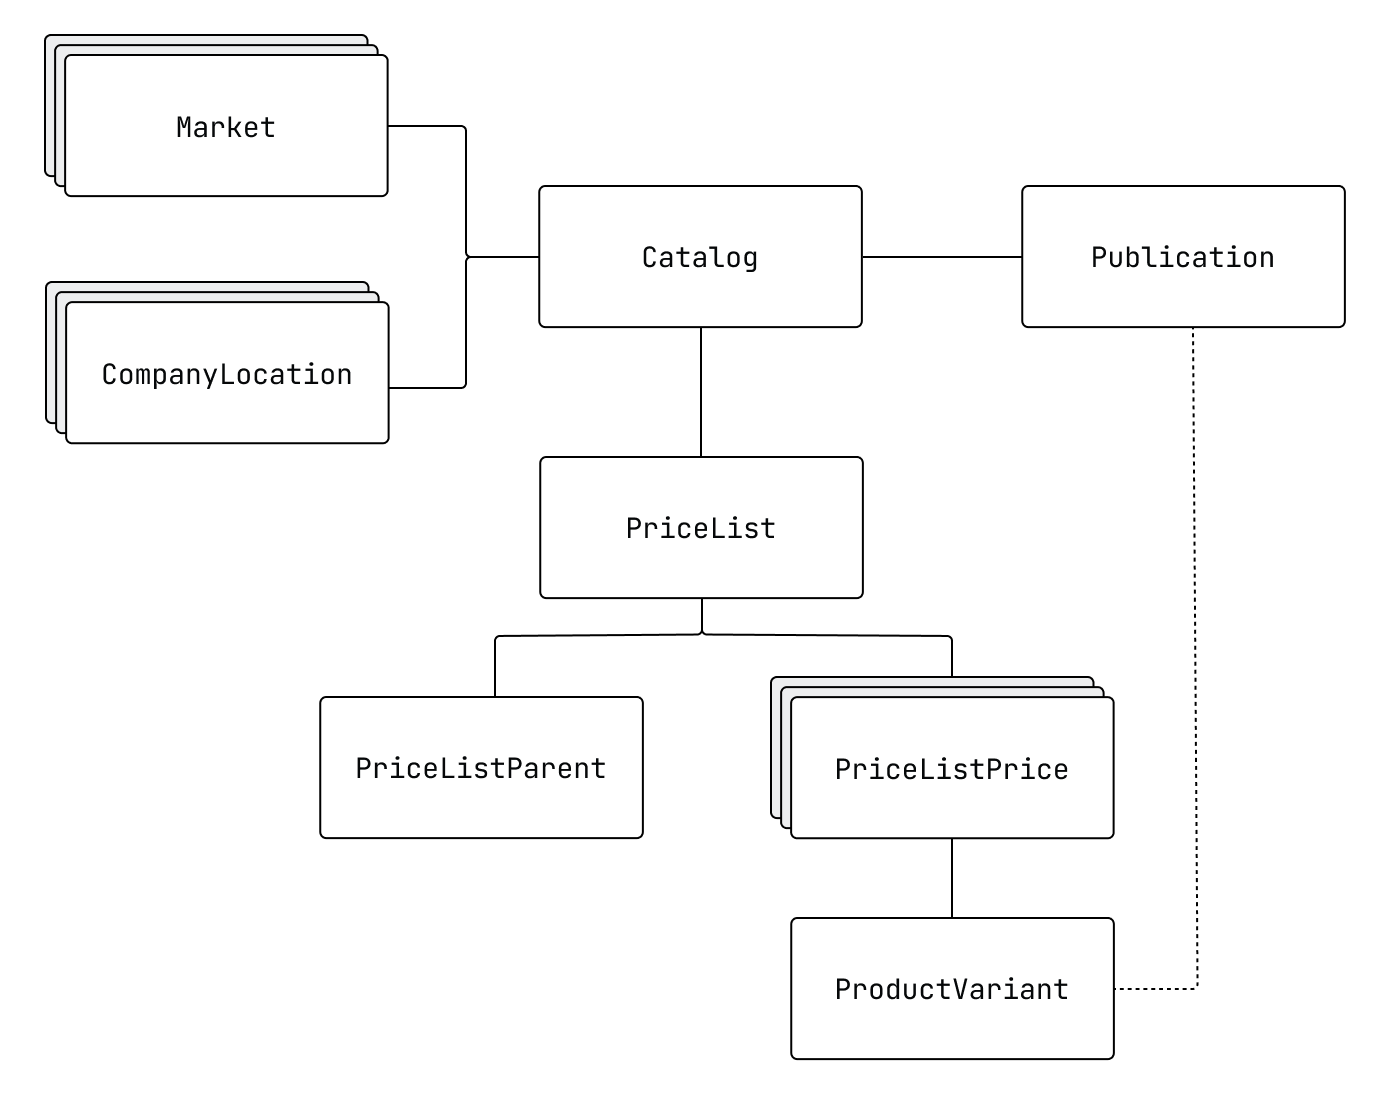 A diagram showing the relationships between catalogs and price list objects